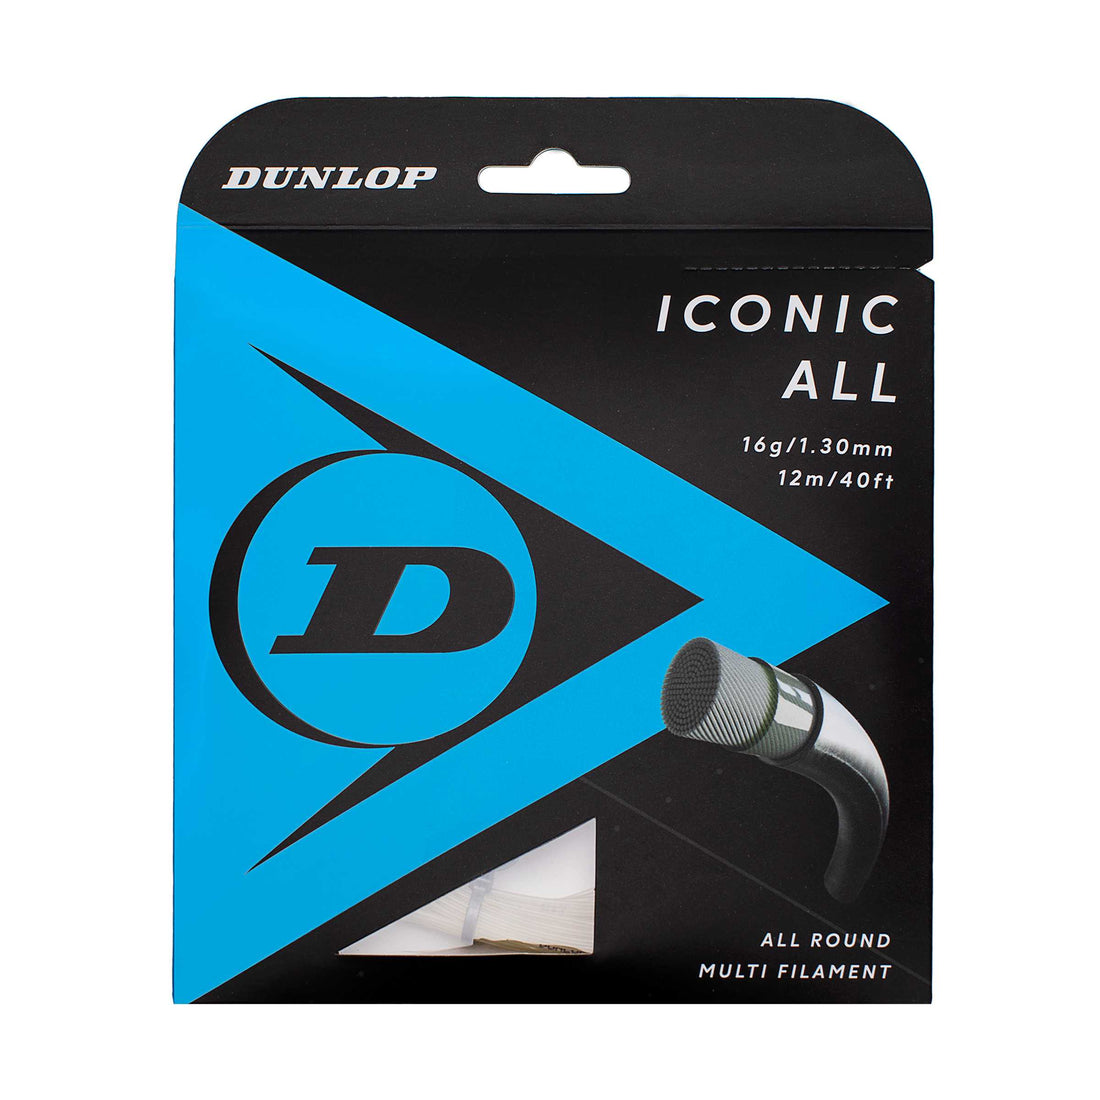 Dunlop Iconic All 16G Tennis String Set Racquet Point